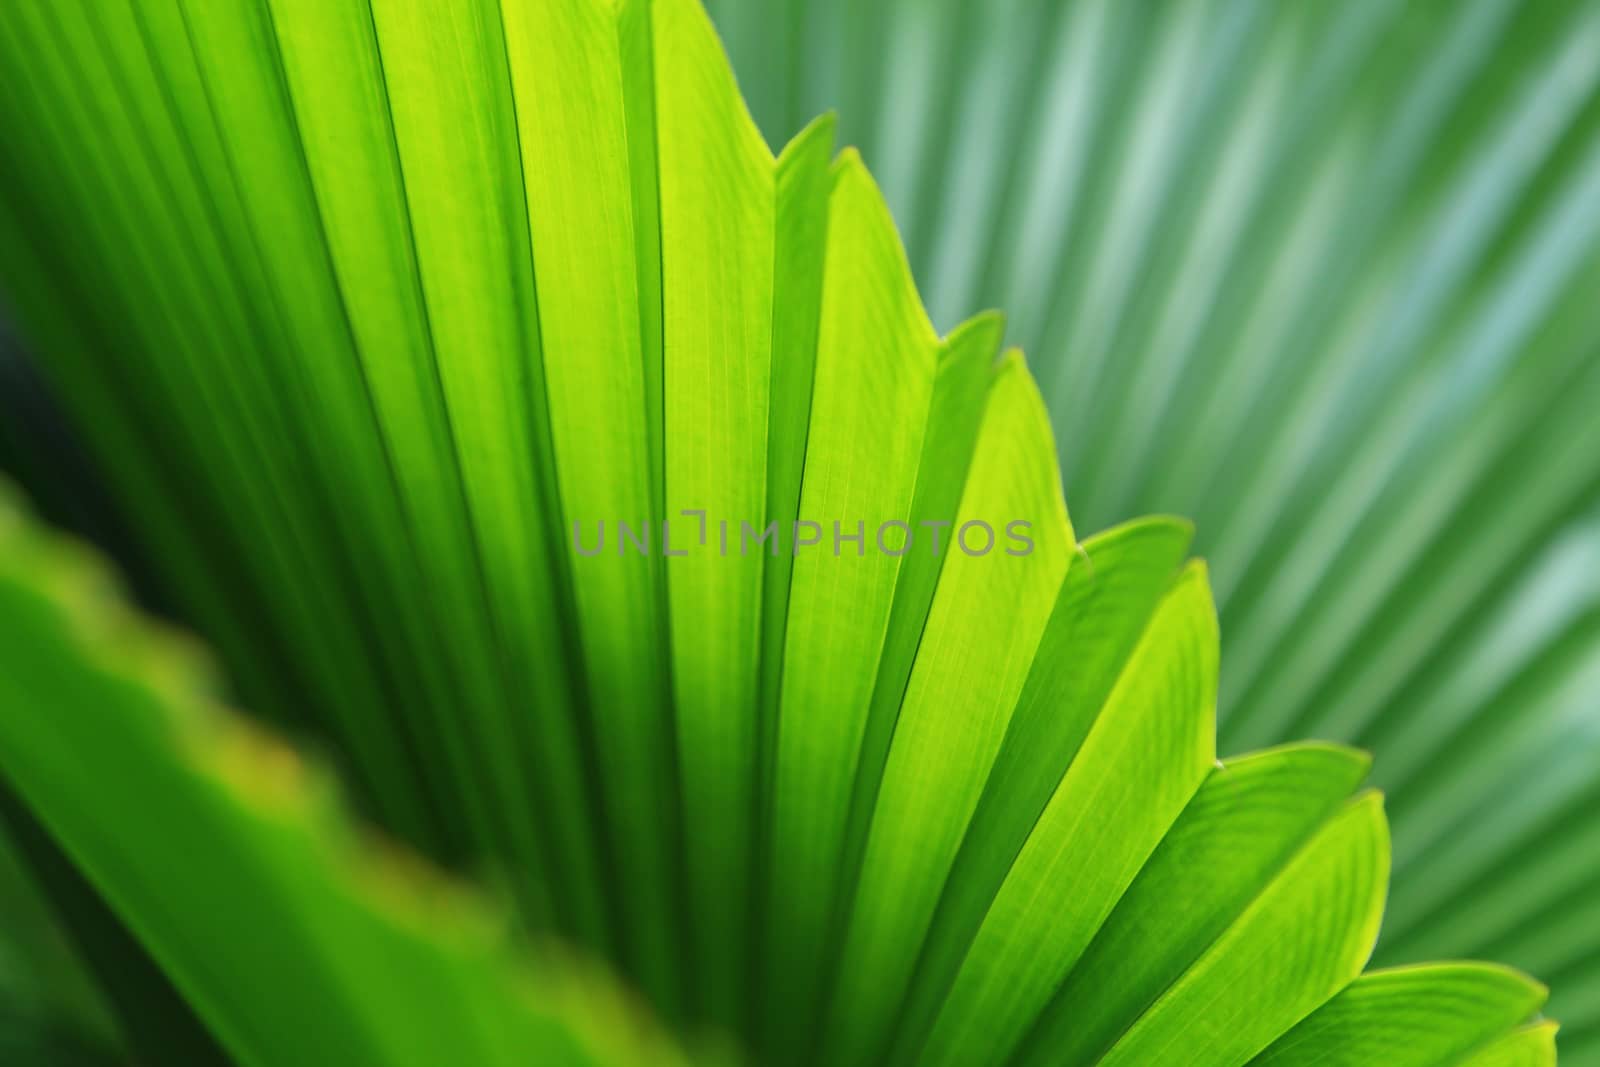 Palm trees leaves by foto76